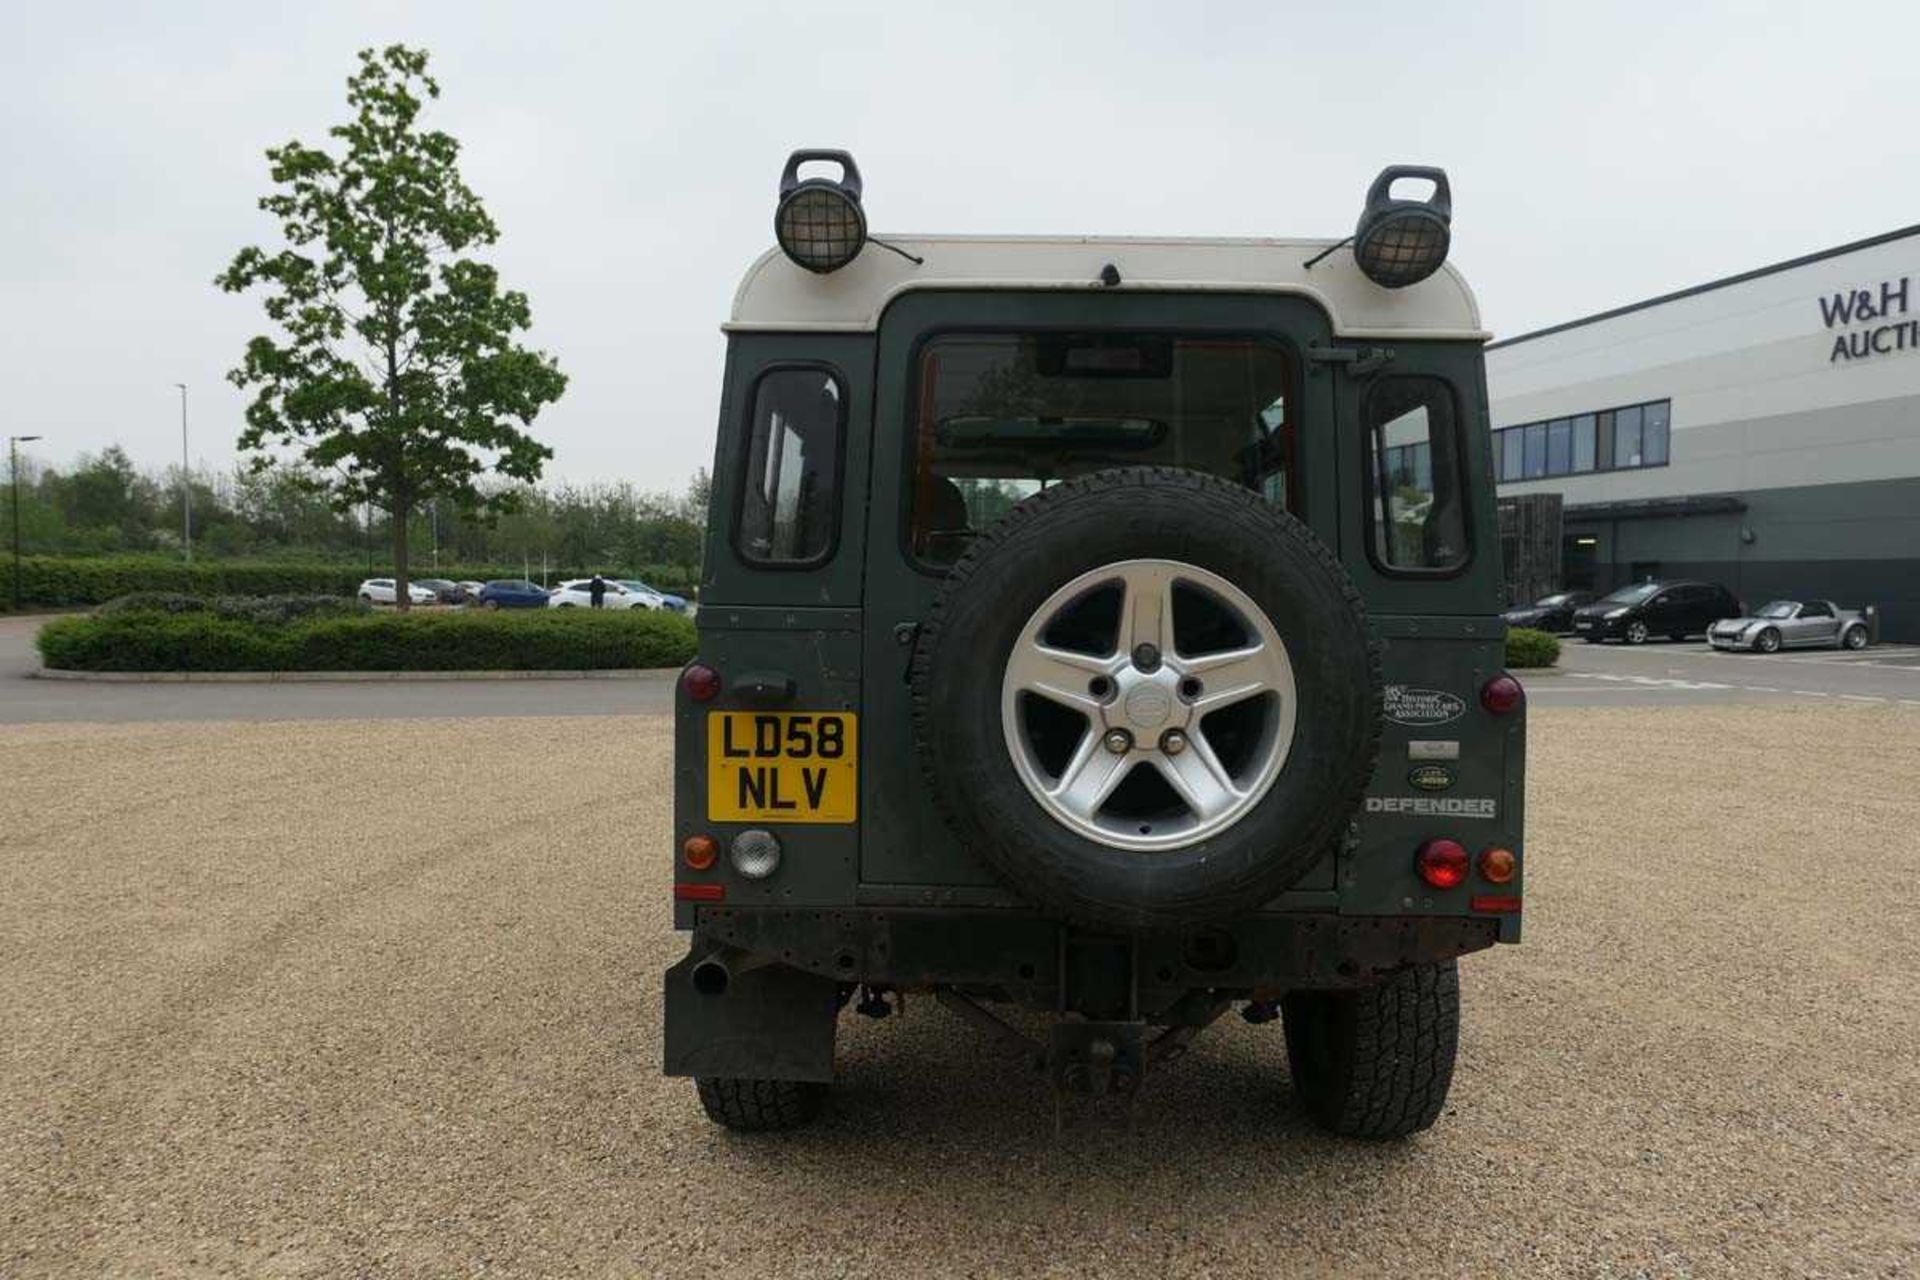 (LD58 NLV) 2008 Land Rover Defender 110 LWB station wagon estate in green, 2402cc diesel, 6-speed - Image 18 of 20